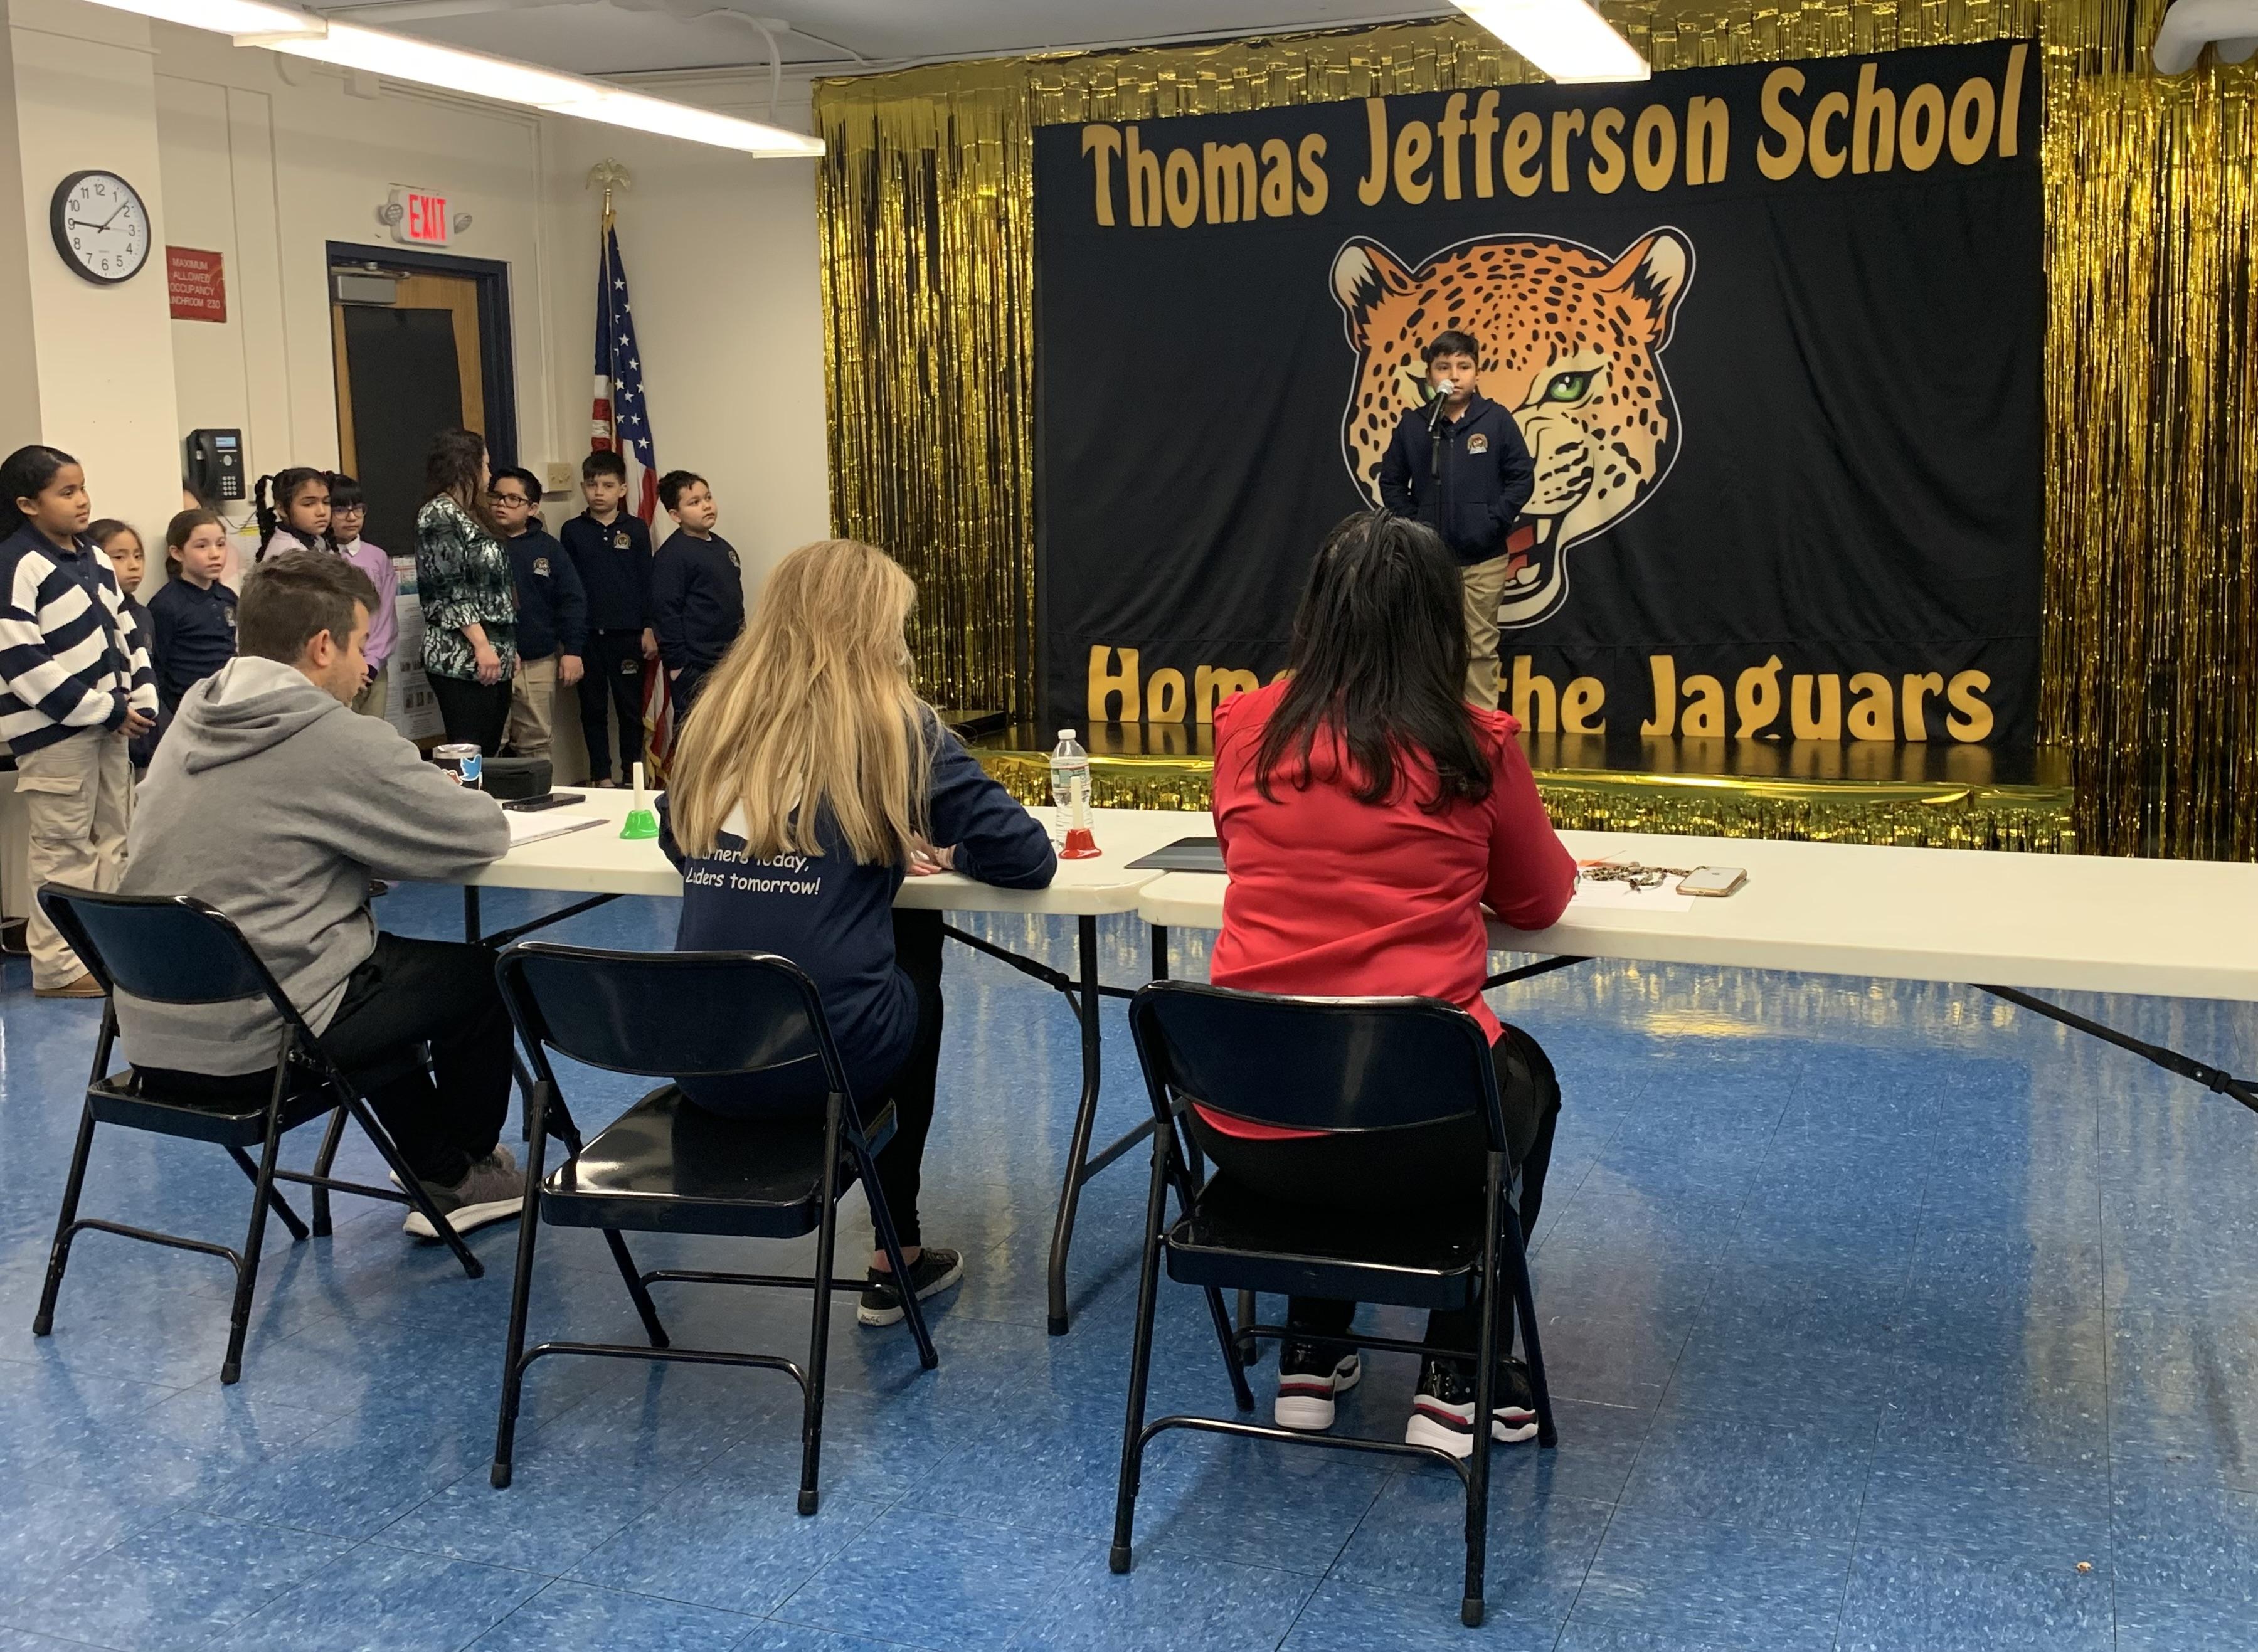 An Exciting Spelling Bee at the Jefferson School